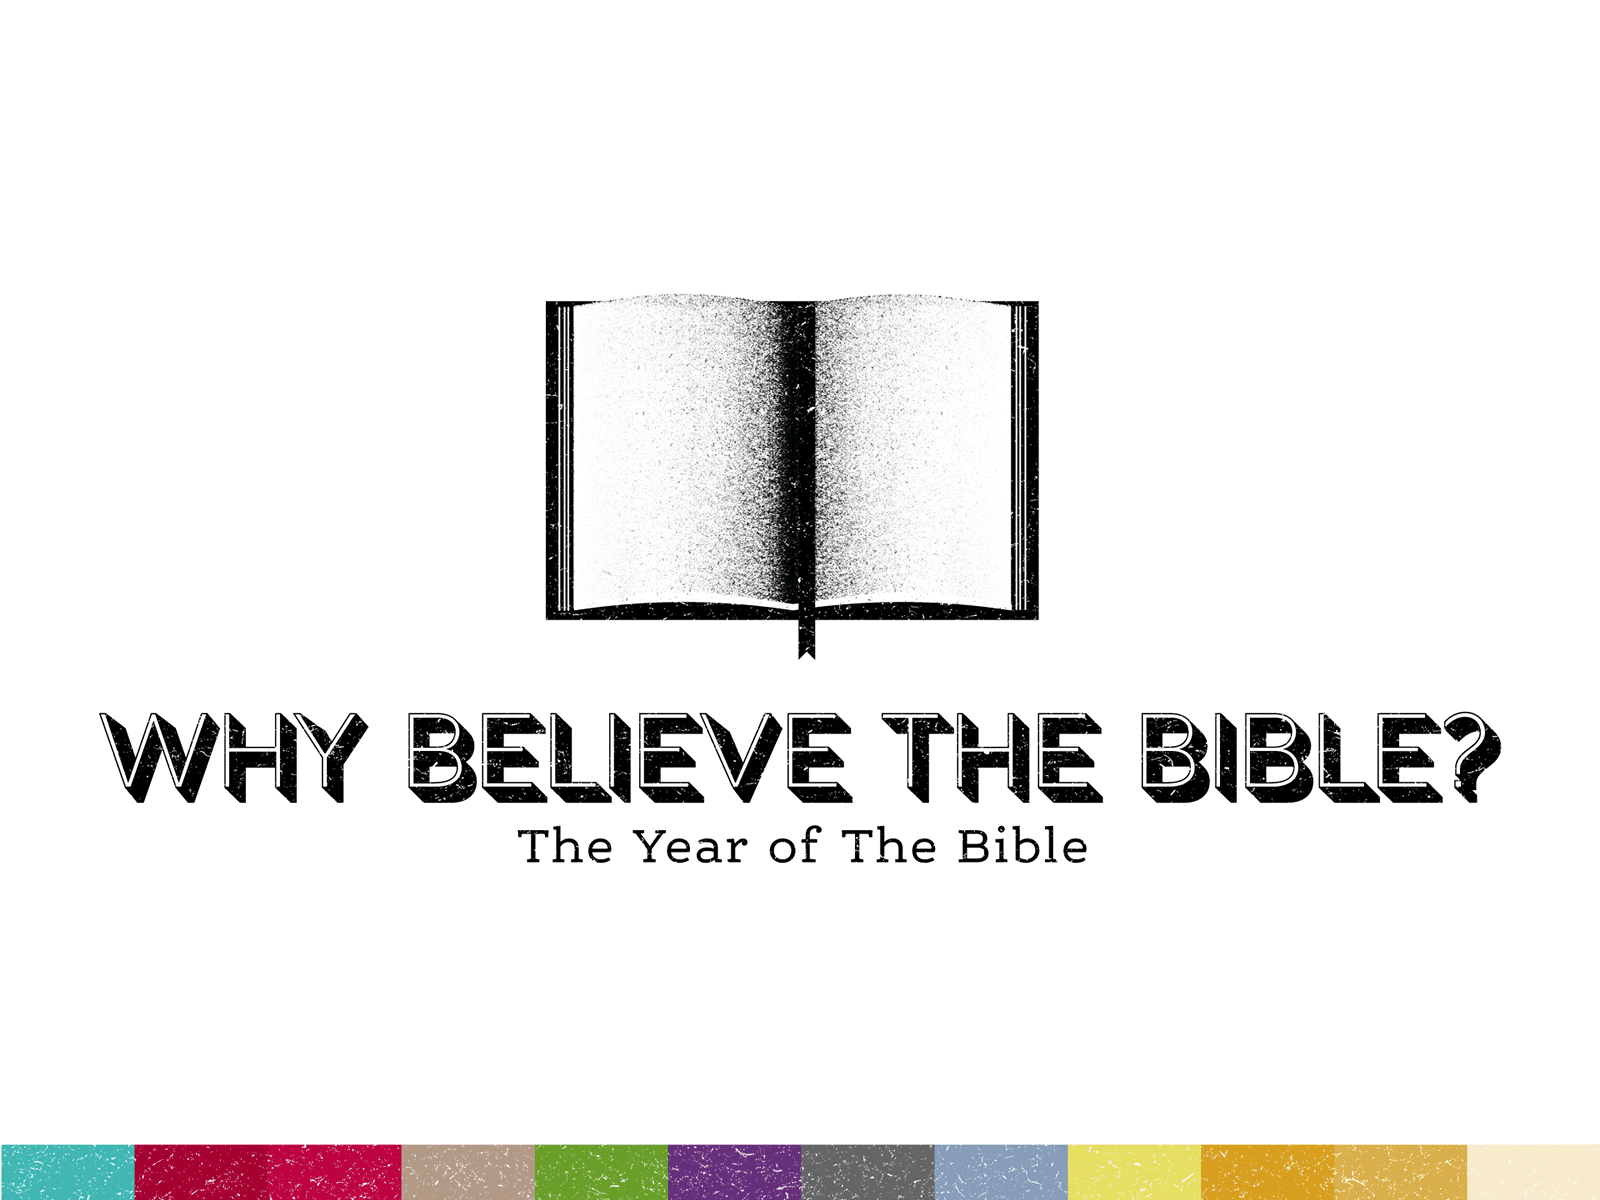 Year of the Bible - First Look apple arc believe bible camel creation crown divided kingdom early world exile fall flood nations rainbow sermon serpent year